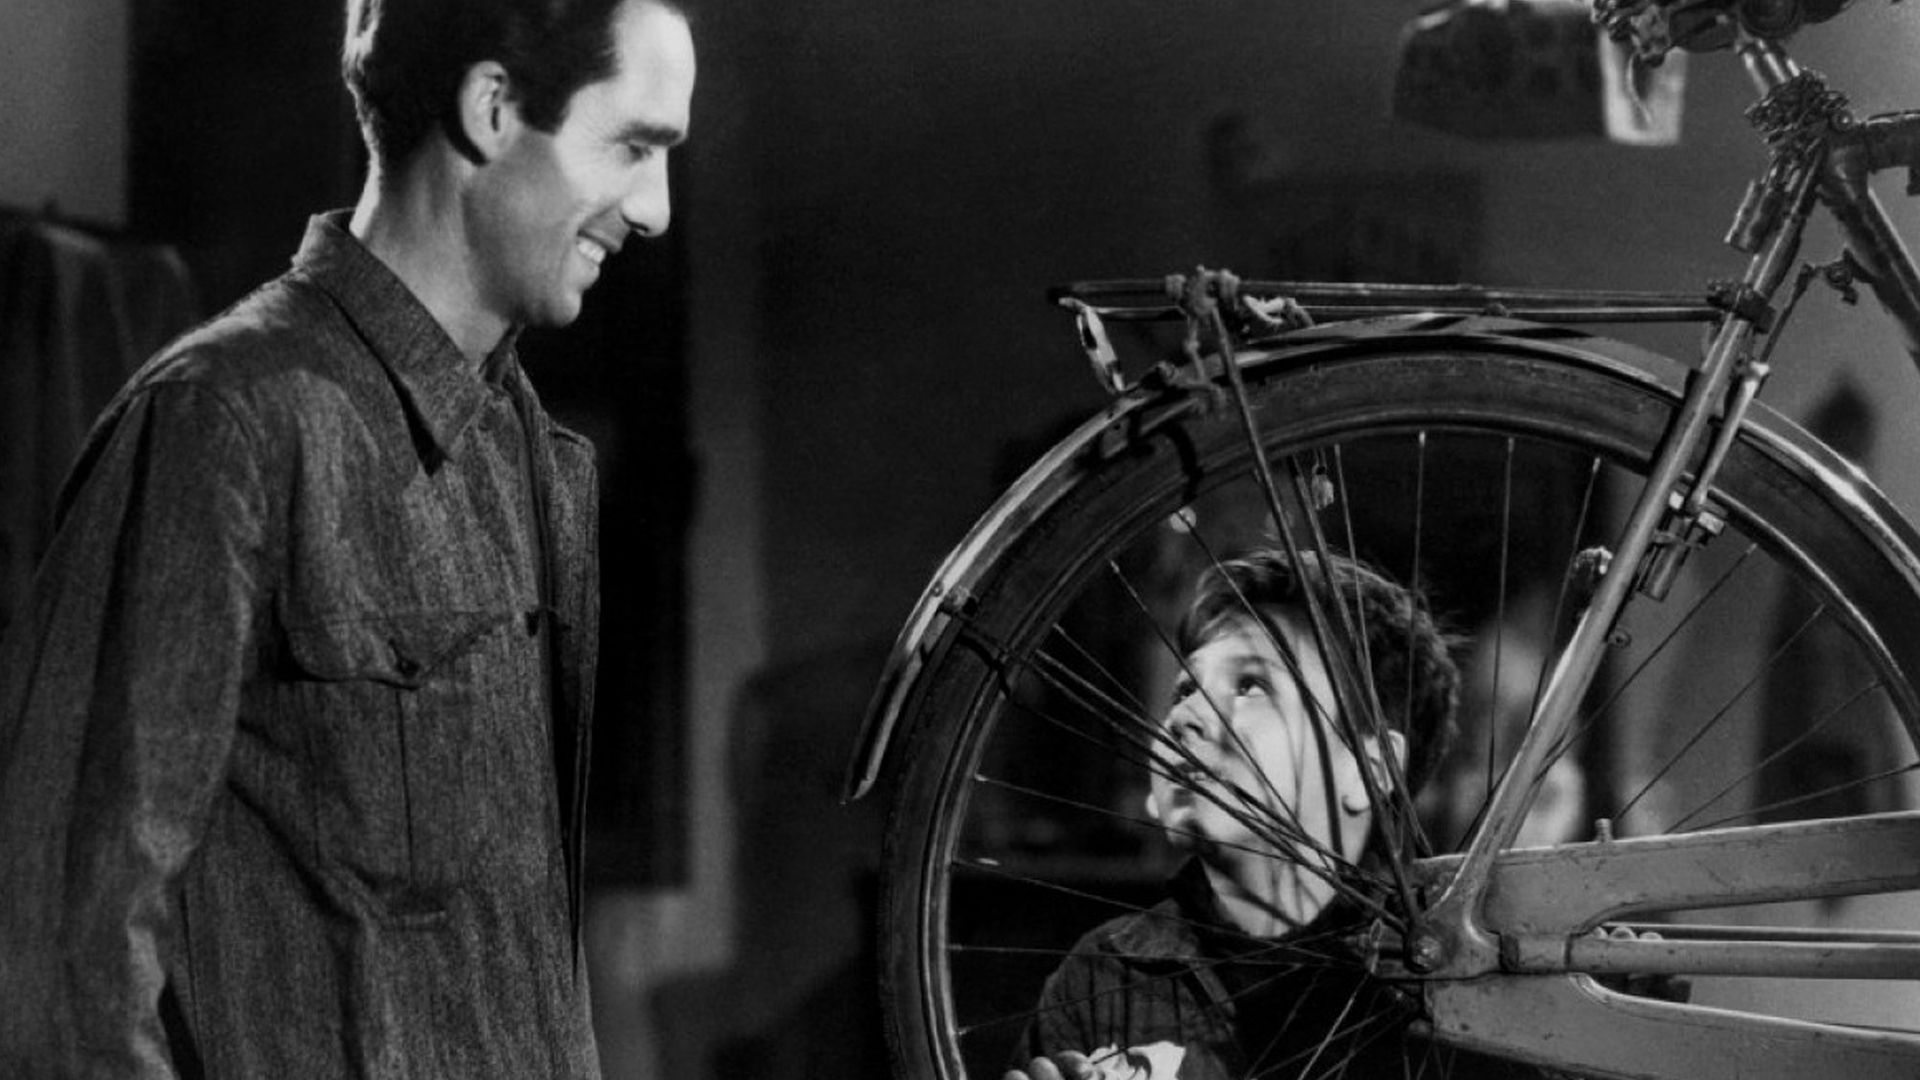 Bicycle Thieves background